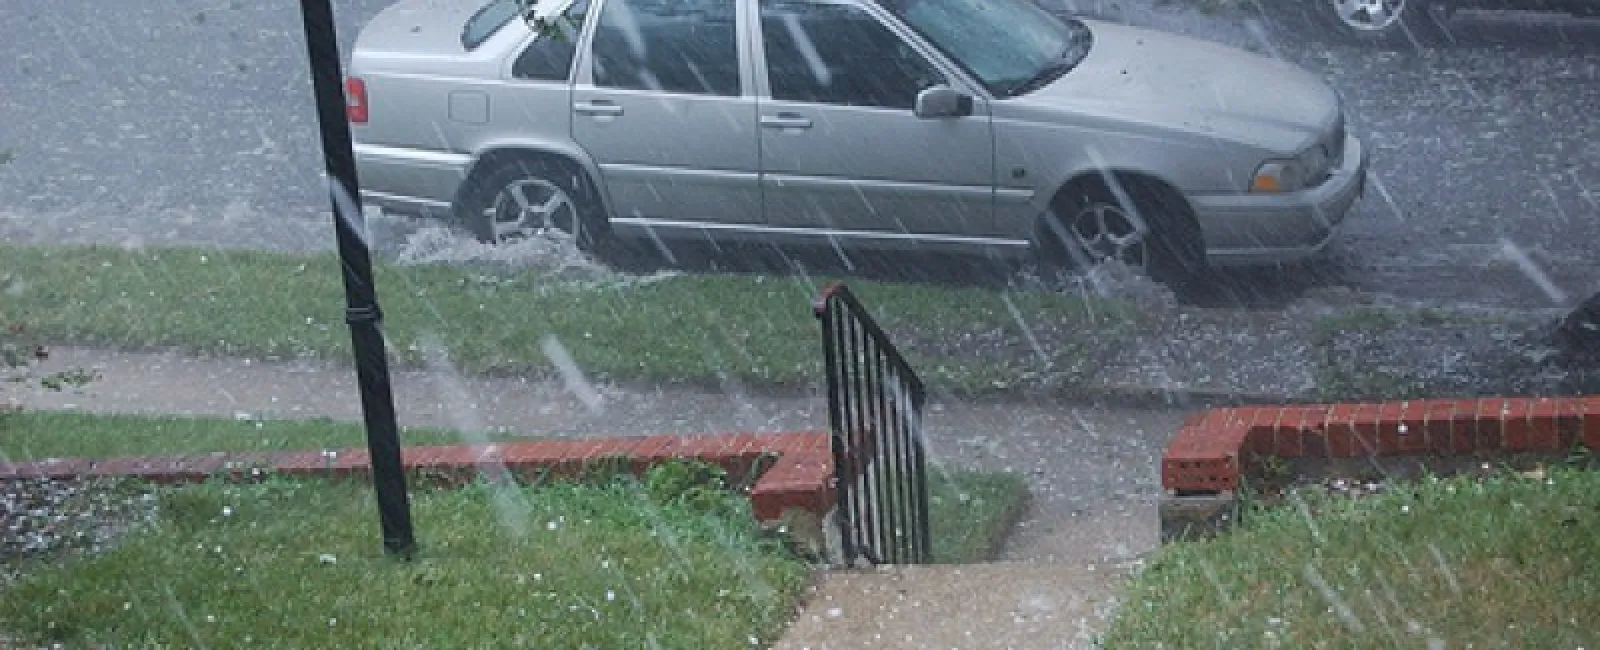 Hearing hail reports? How to react